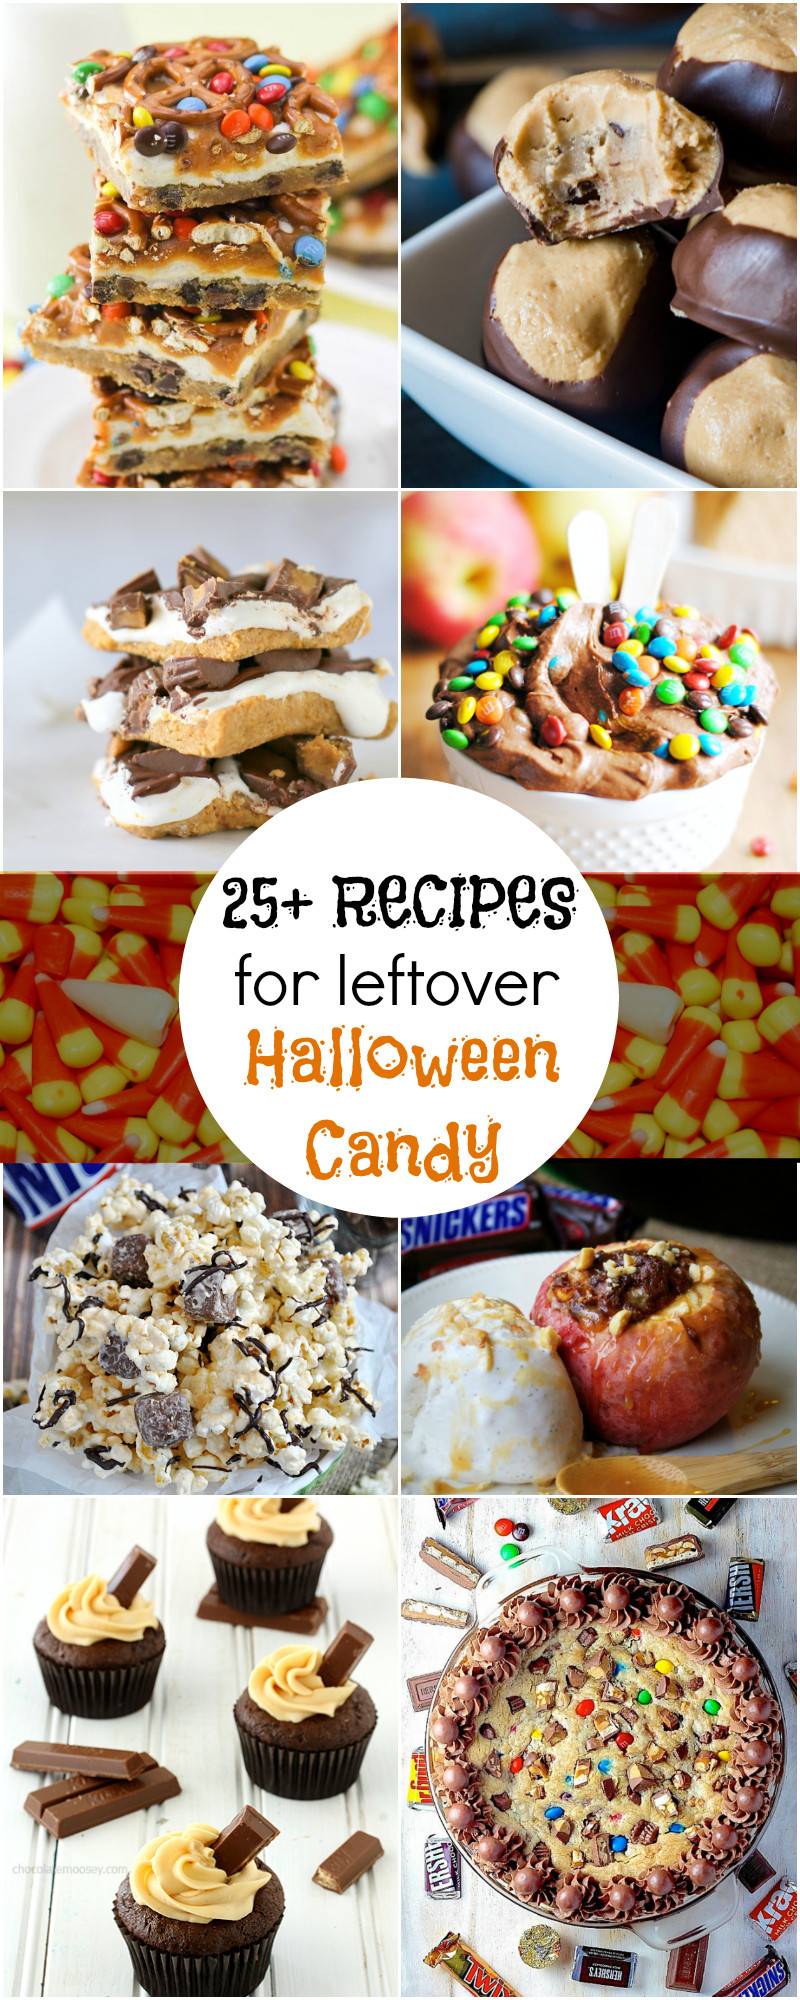 Leftover Halloween Candy Recipes
 25 Recipes for Leftover Halloween Candy A Grande Life